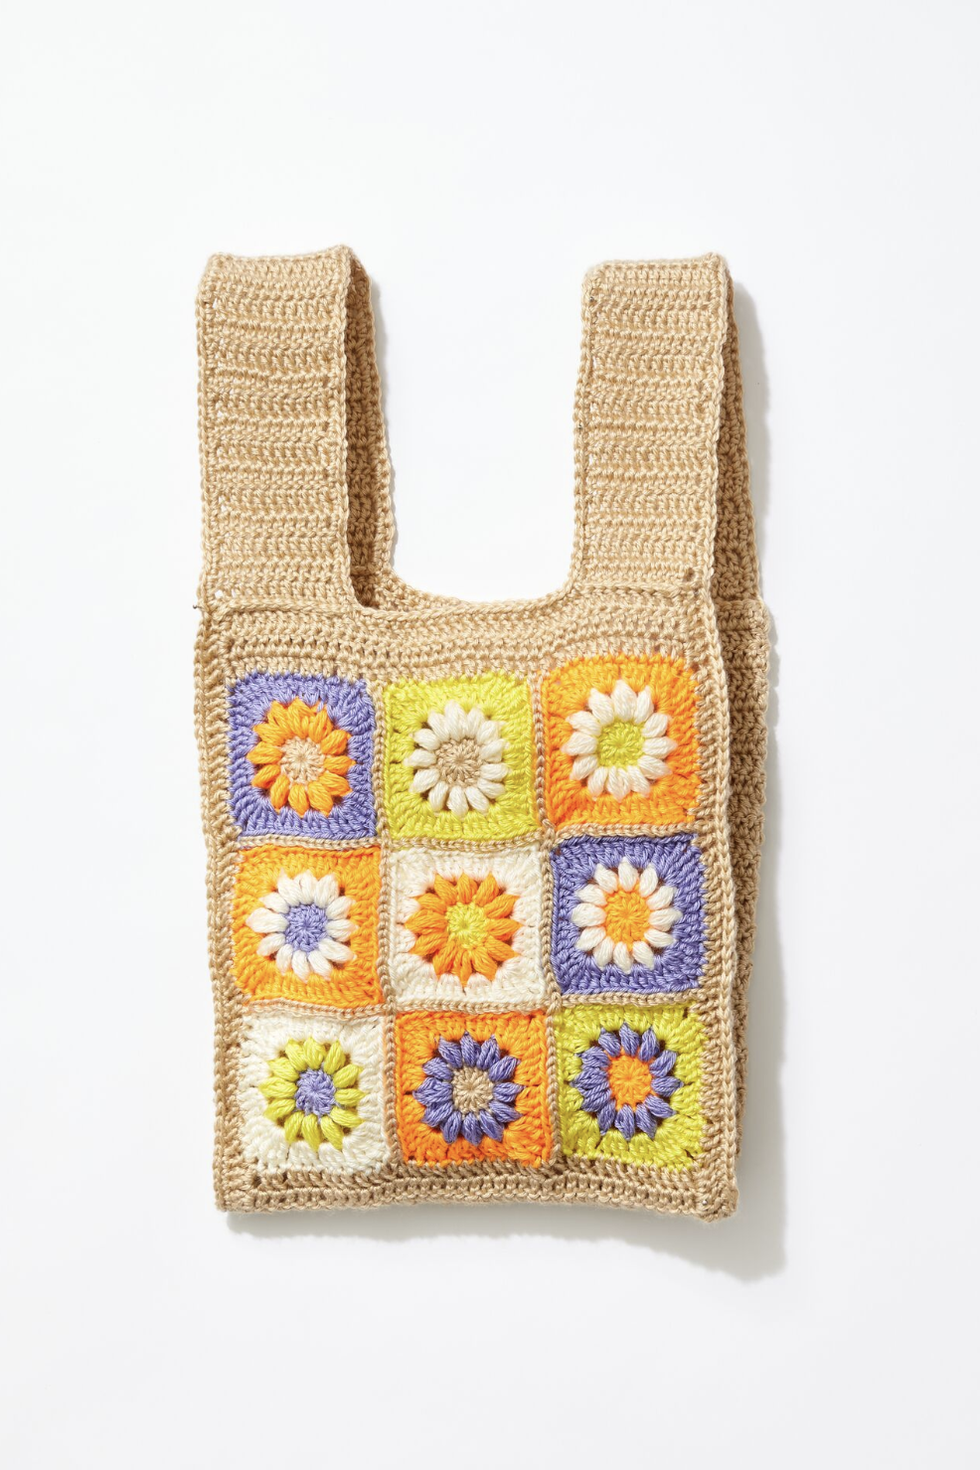 DIY Mother's Day Gift, Daisy Square Bag on White Background